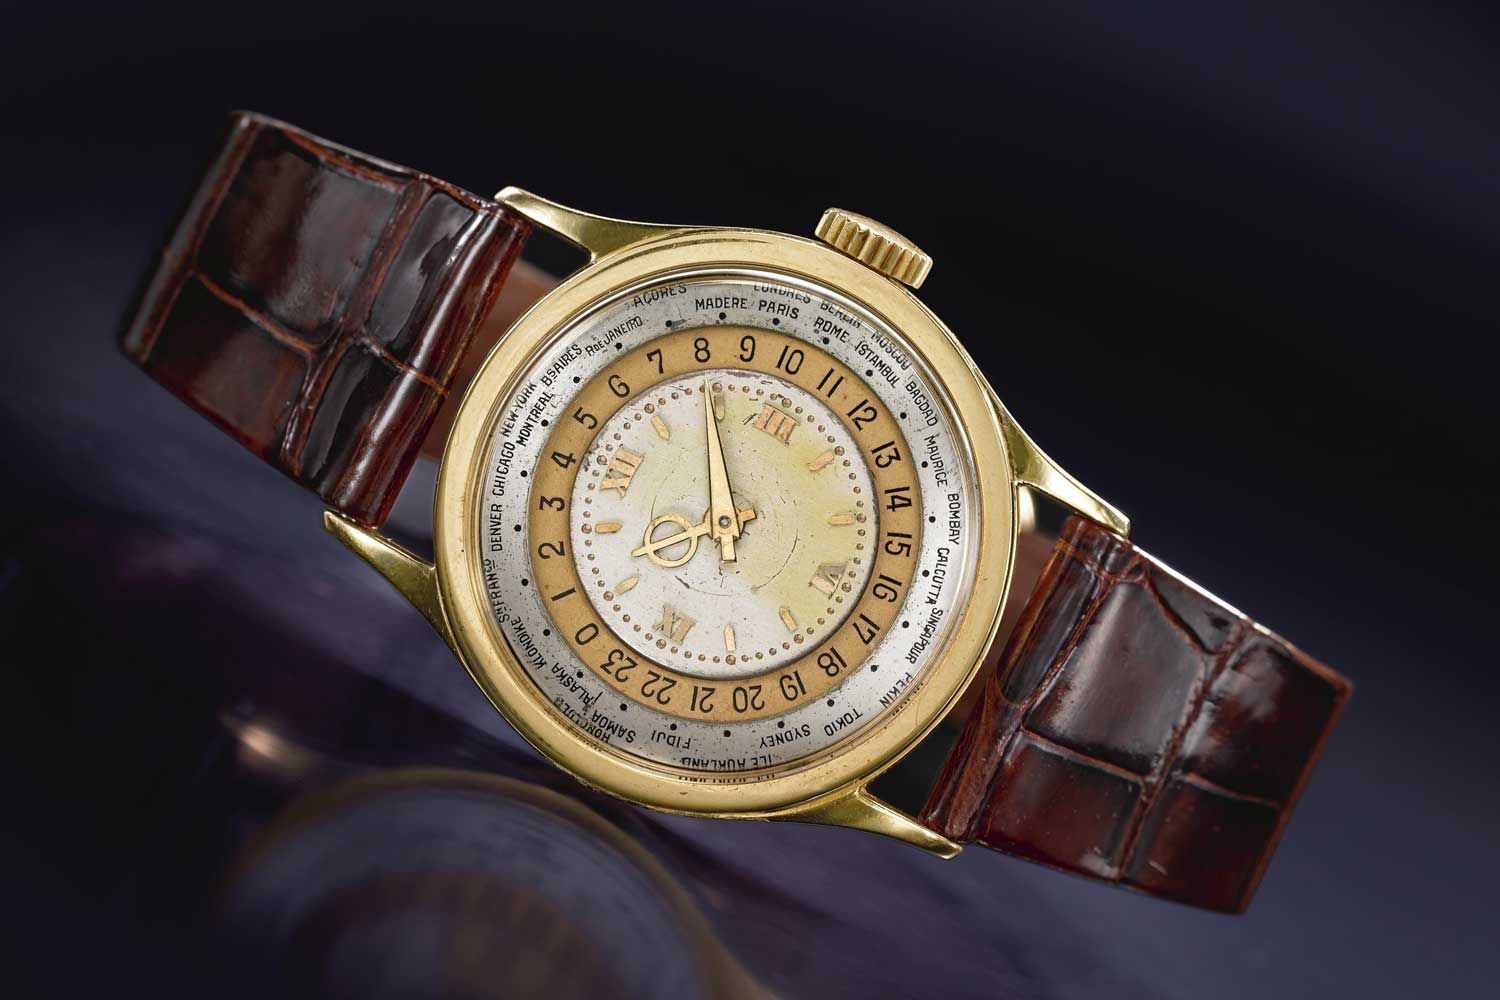 The reference 96 was one of the first truly successful round wristwatches for Patek Philippe and, in the context of the 1930s, was its icon. This watch was sold at Sotheby’s in 2011 for USD 482,500 (Image: Sotheby’s )